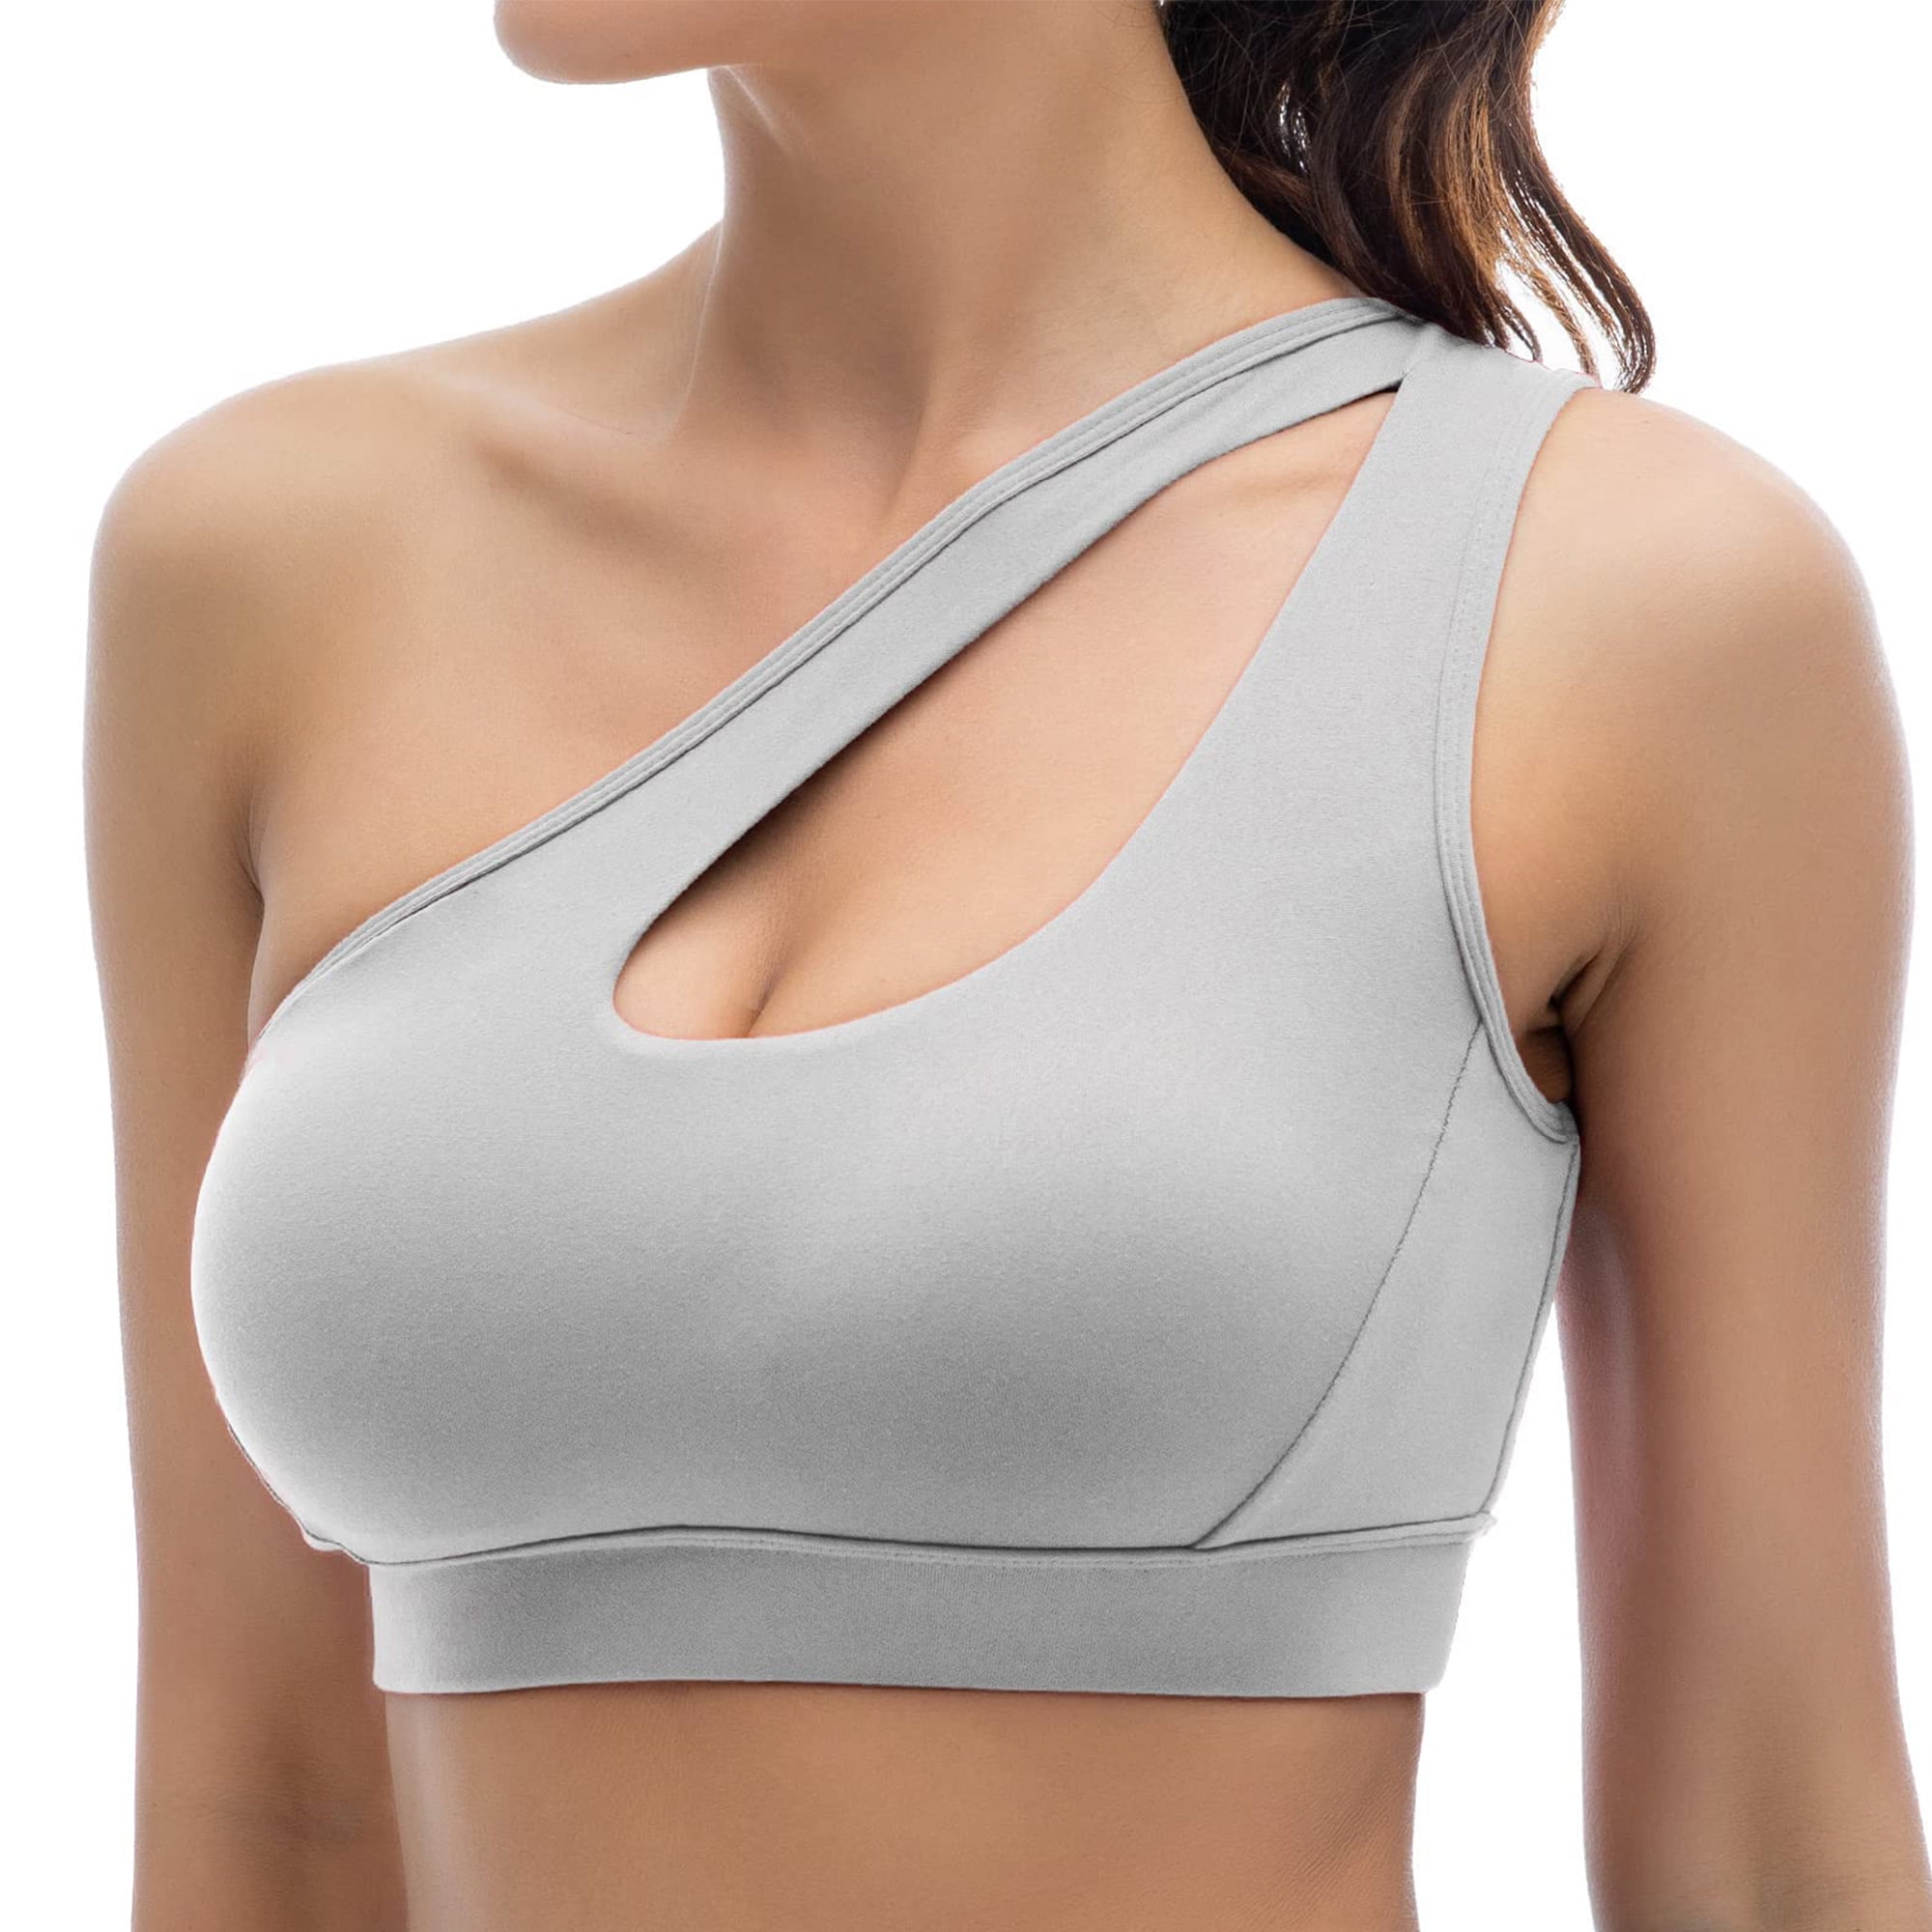 Elbourn One Shoulder Sports Bra for Women Sexy Cute Workout Yoga Bra Medium  Support 1 Pack